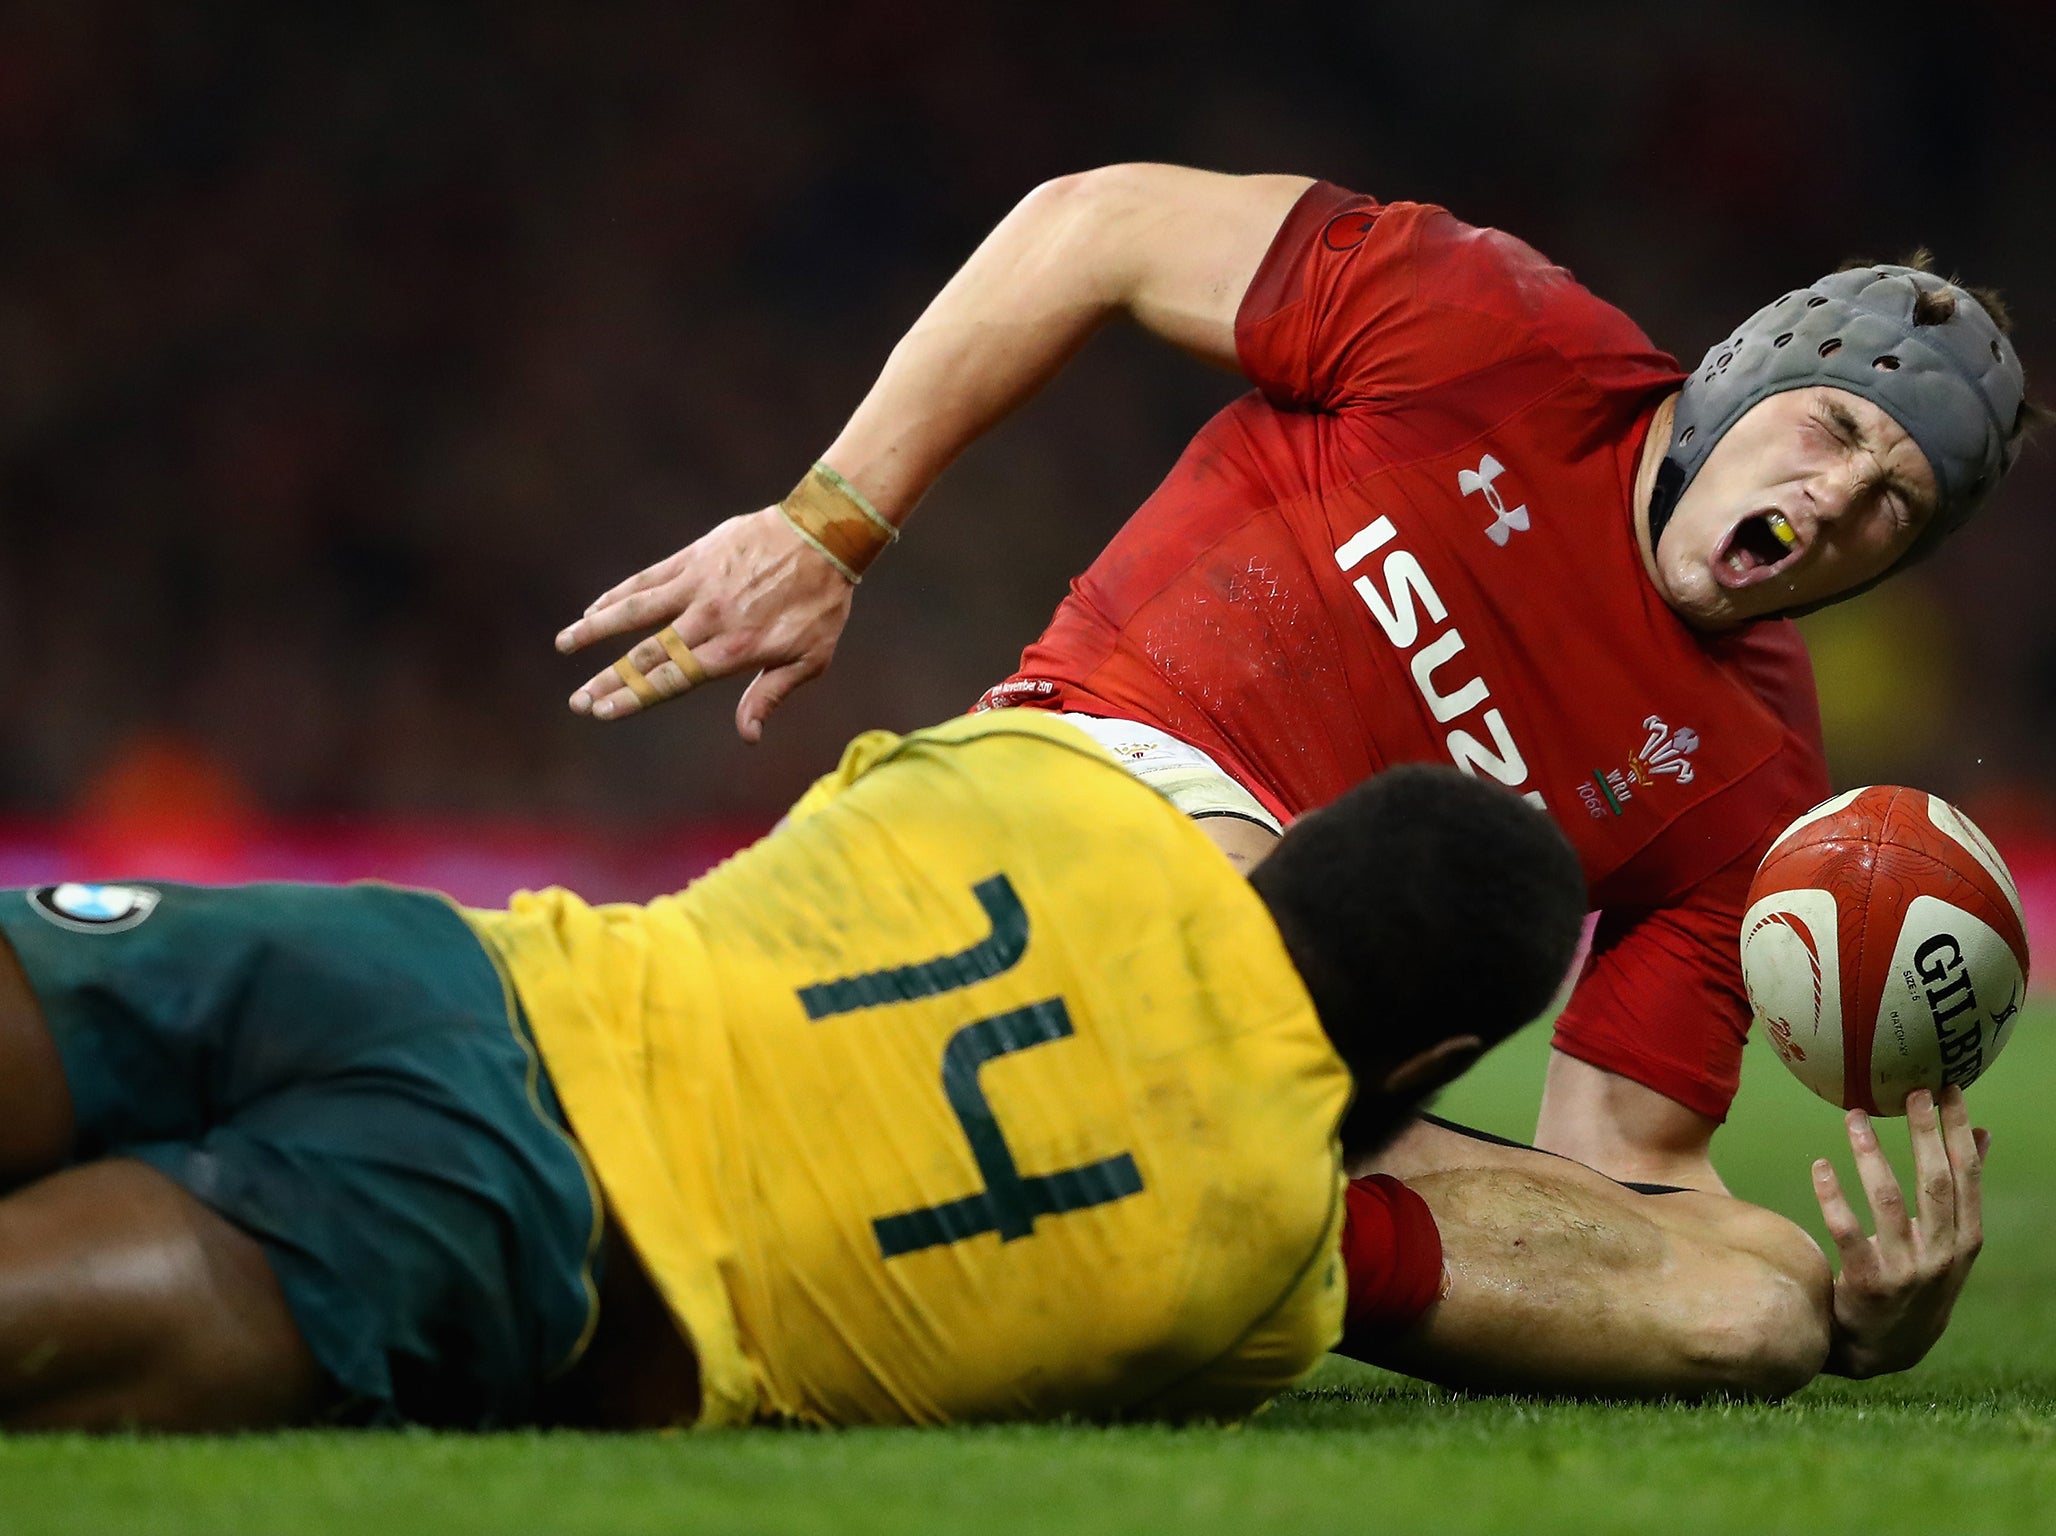 Jonathan Davies had to be taken off with an injury